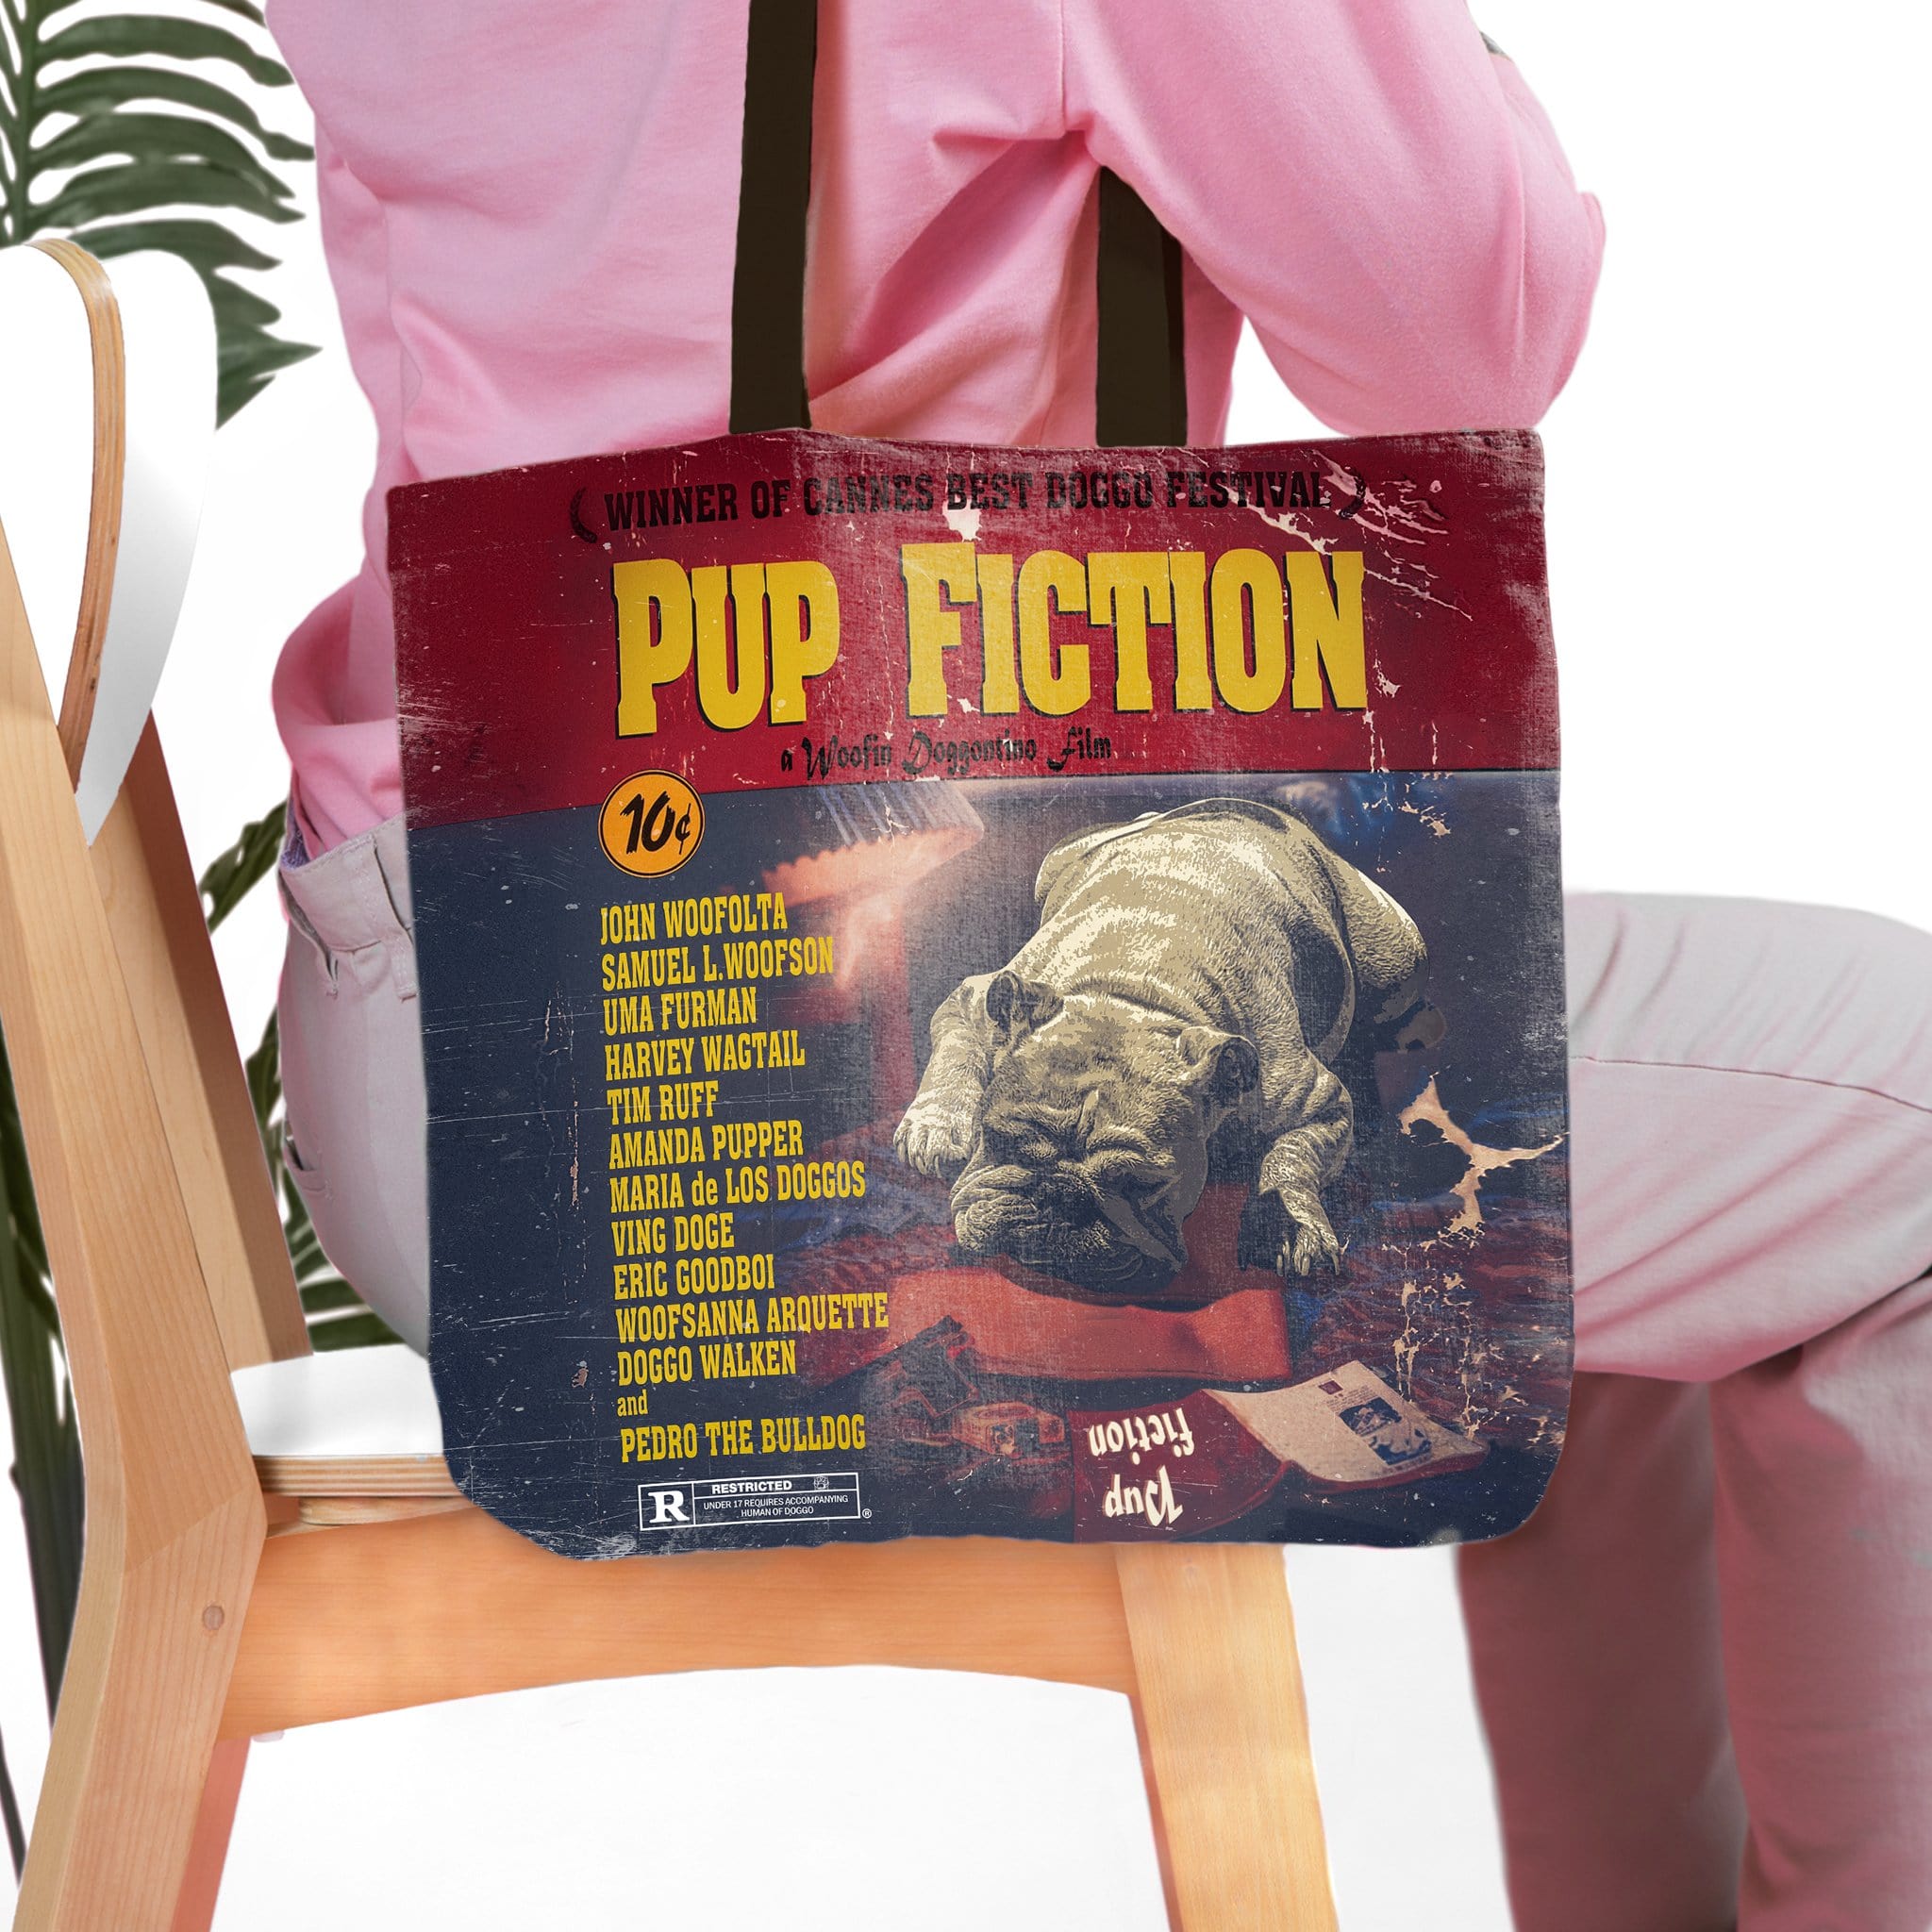 &#39;Pup Fiction&#39; Personalized Tote Bag